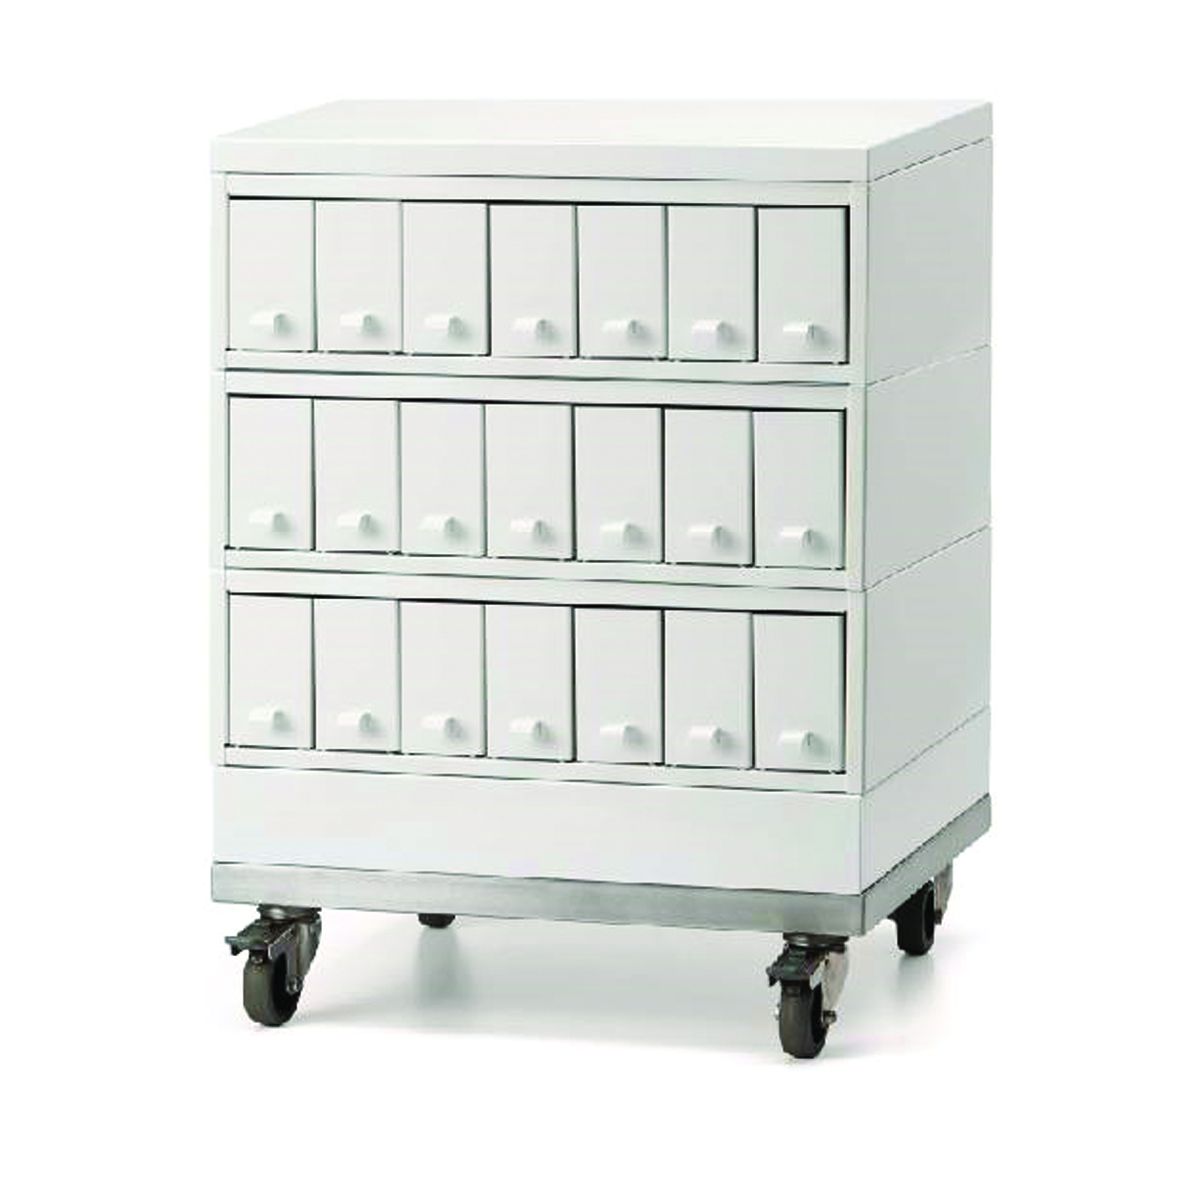 Filing cabinet, 7 drawers